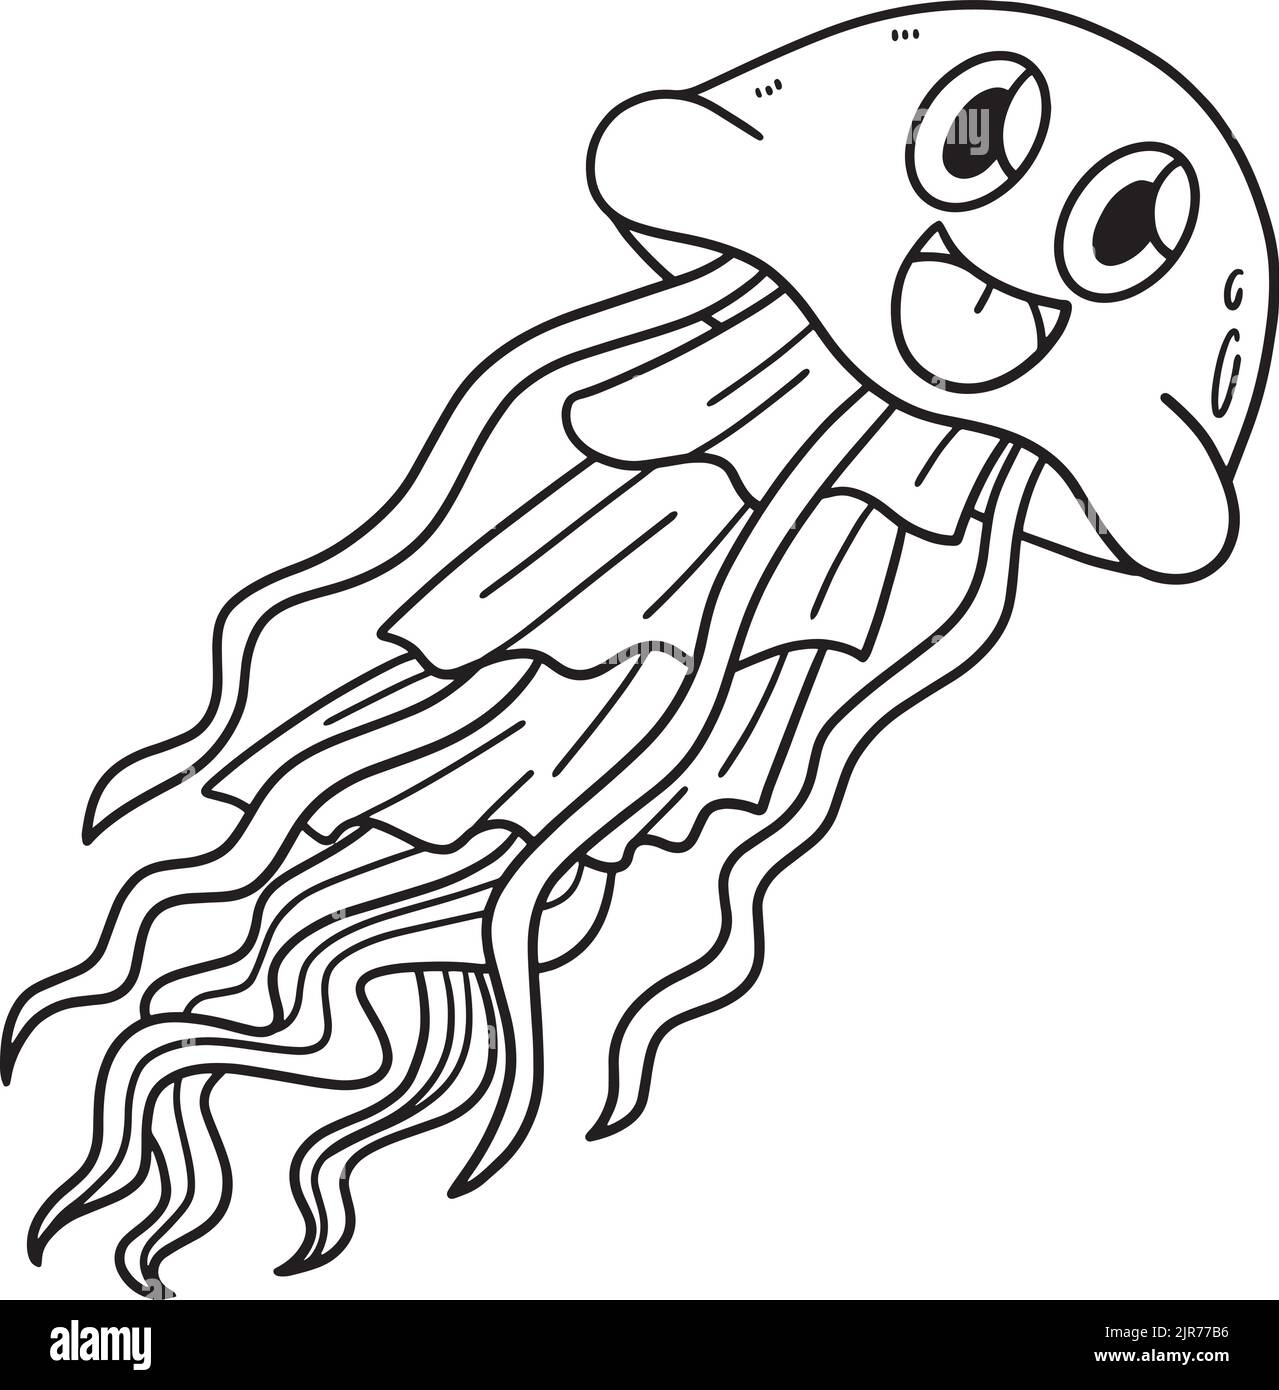 Smiling Jellyfish Isolated Coloring Page for Kids Stock Vector